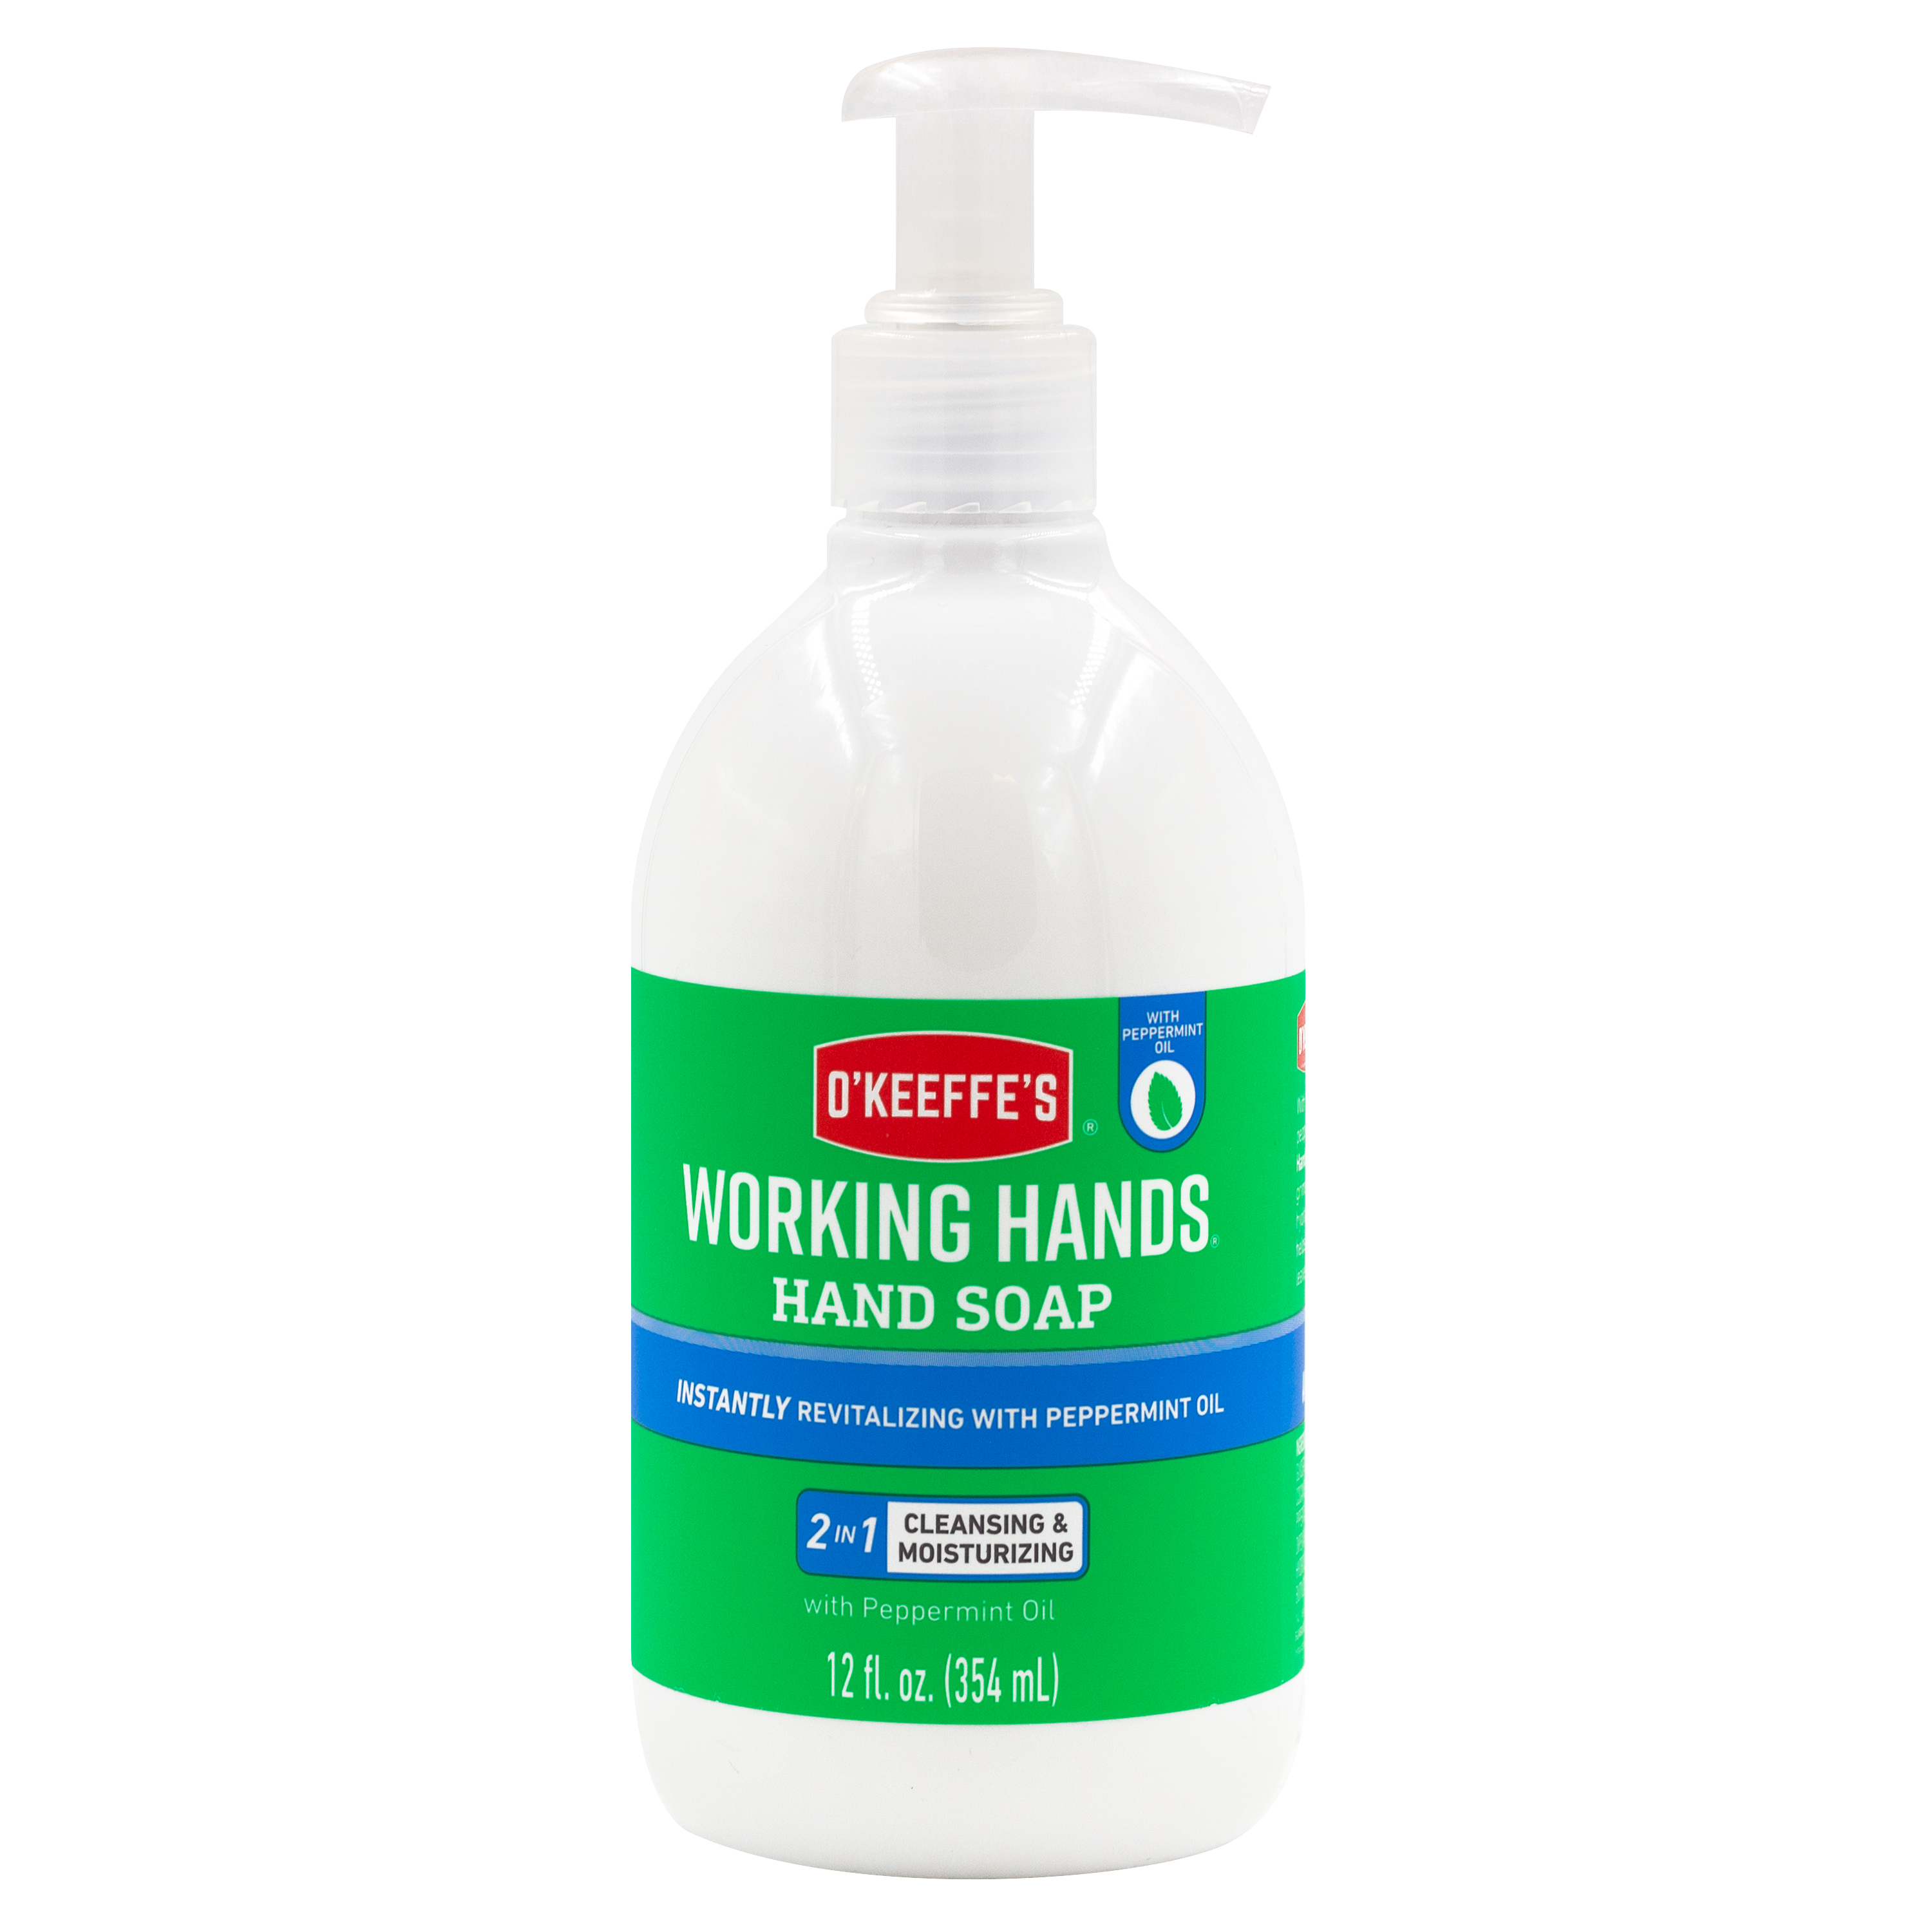 NEW Working Hands Hand Soap Peppermint